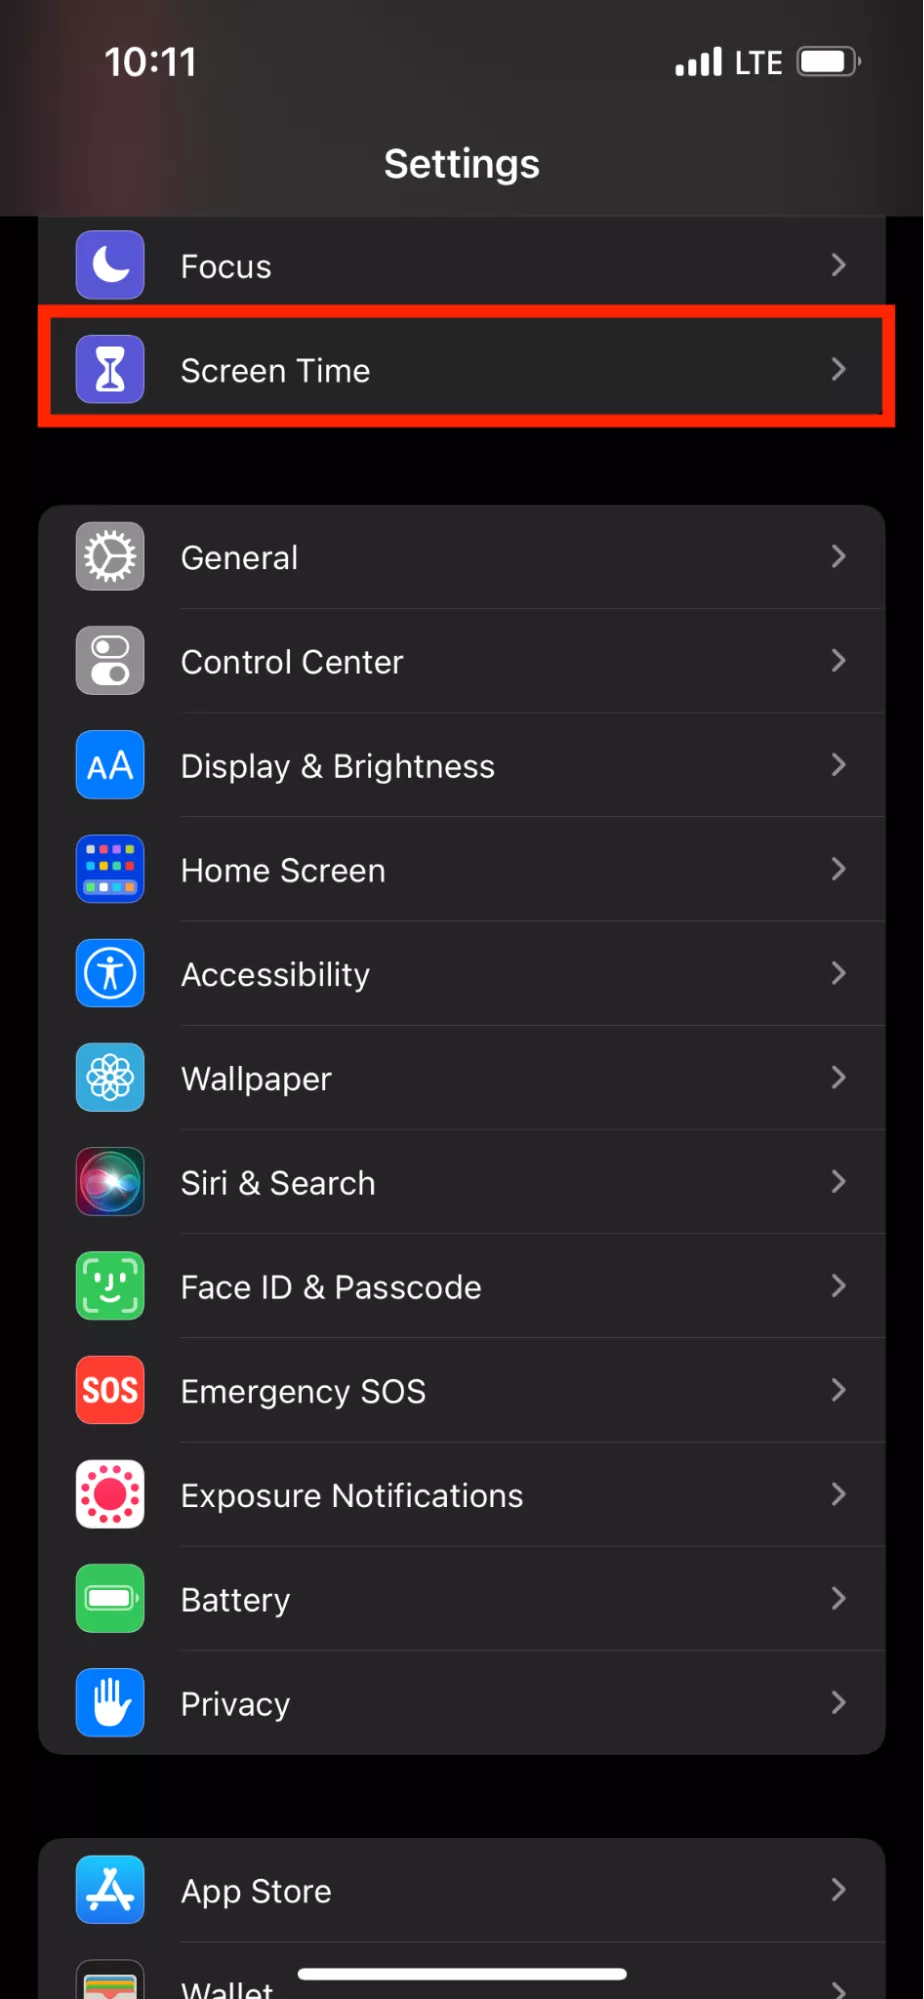 Where are hidden apps stored on iPhone?